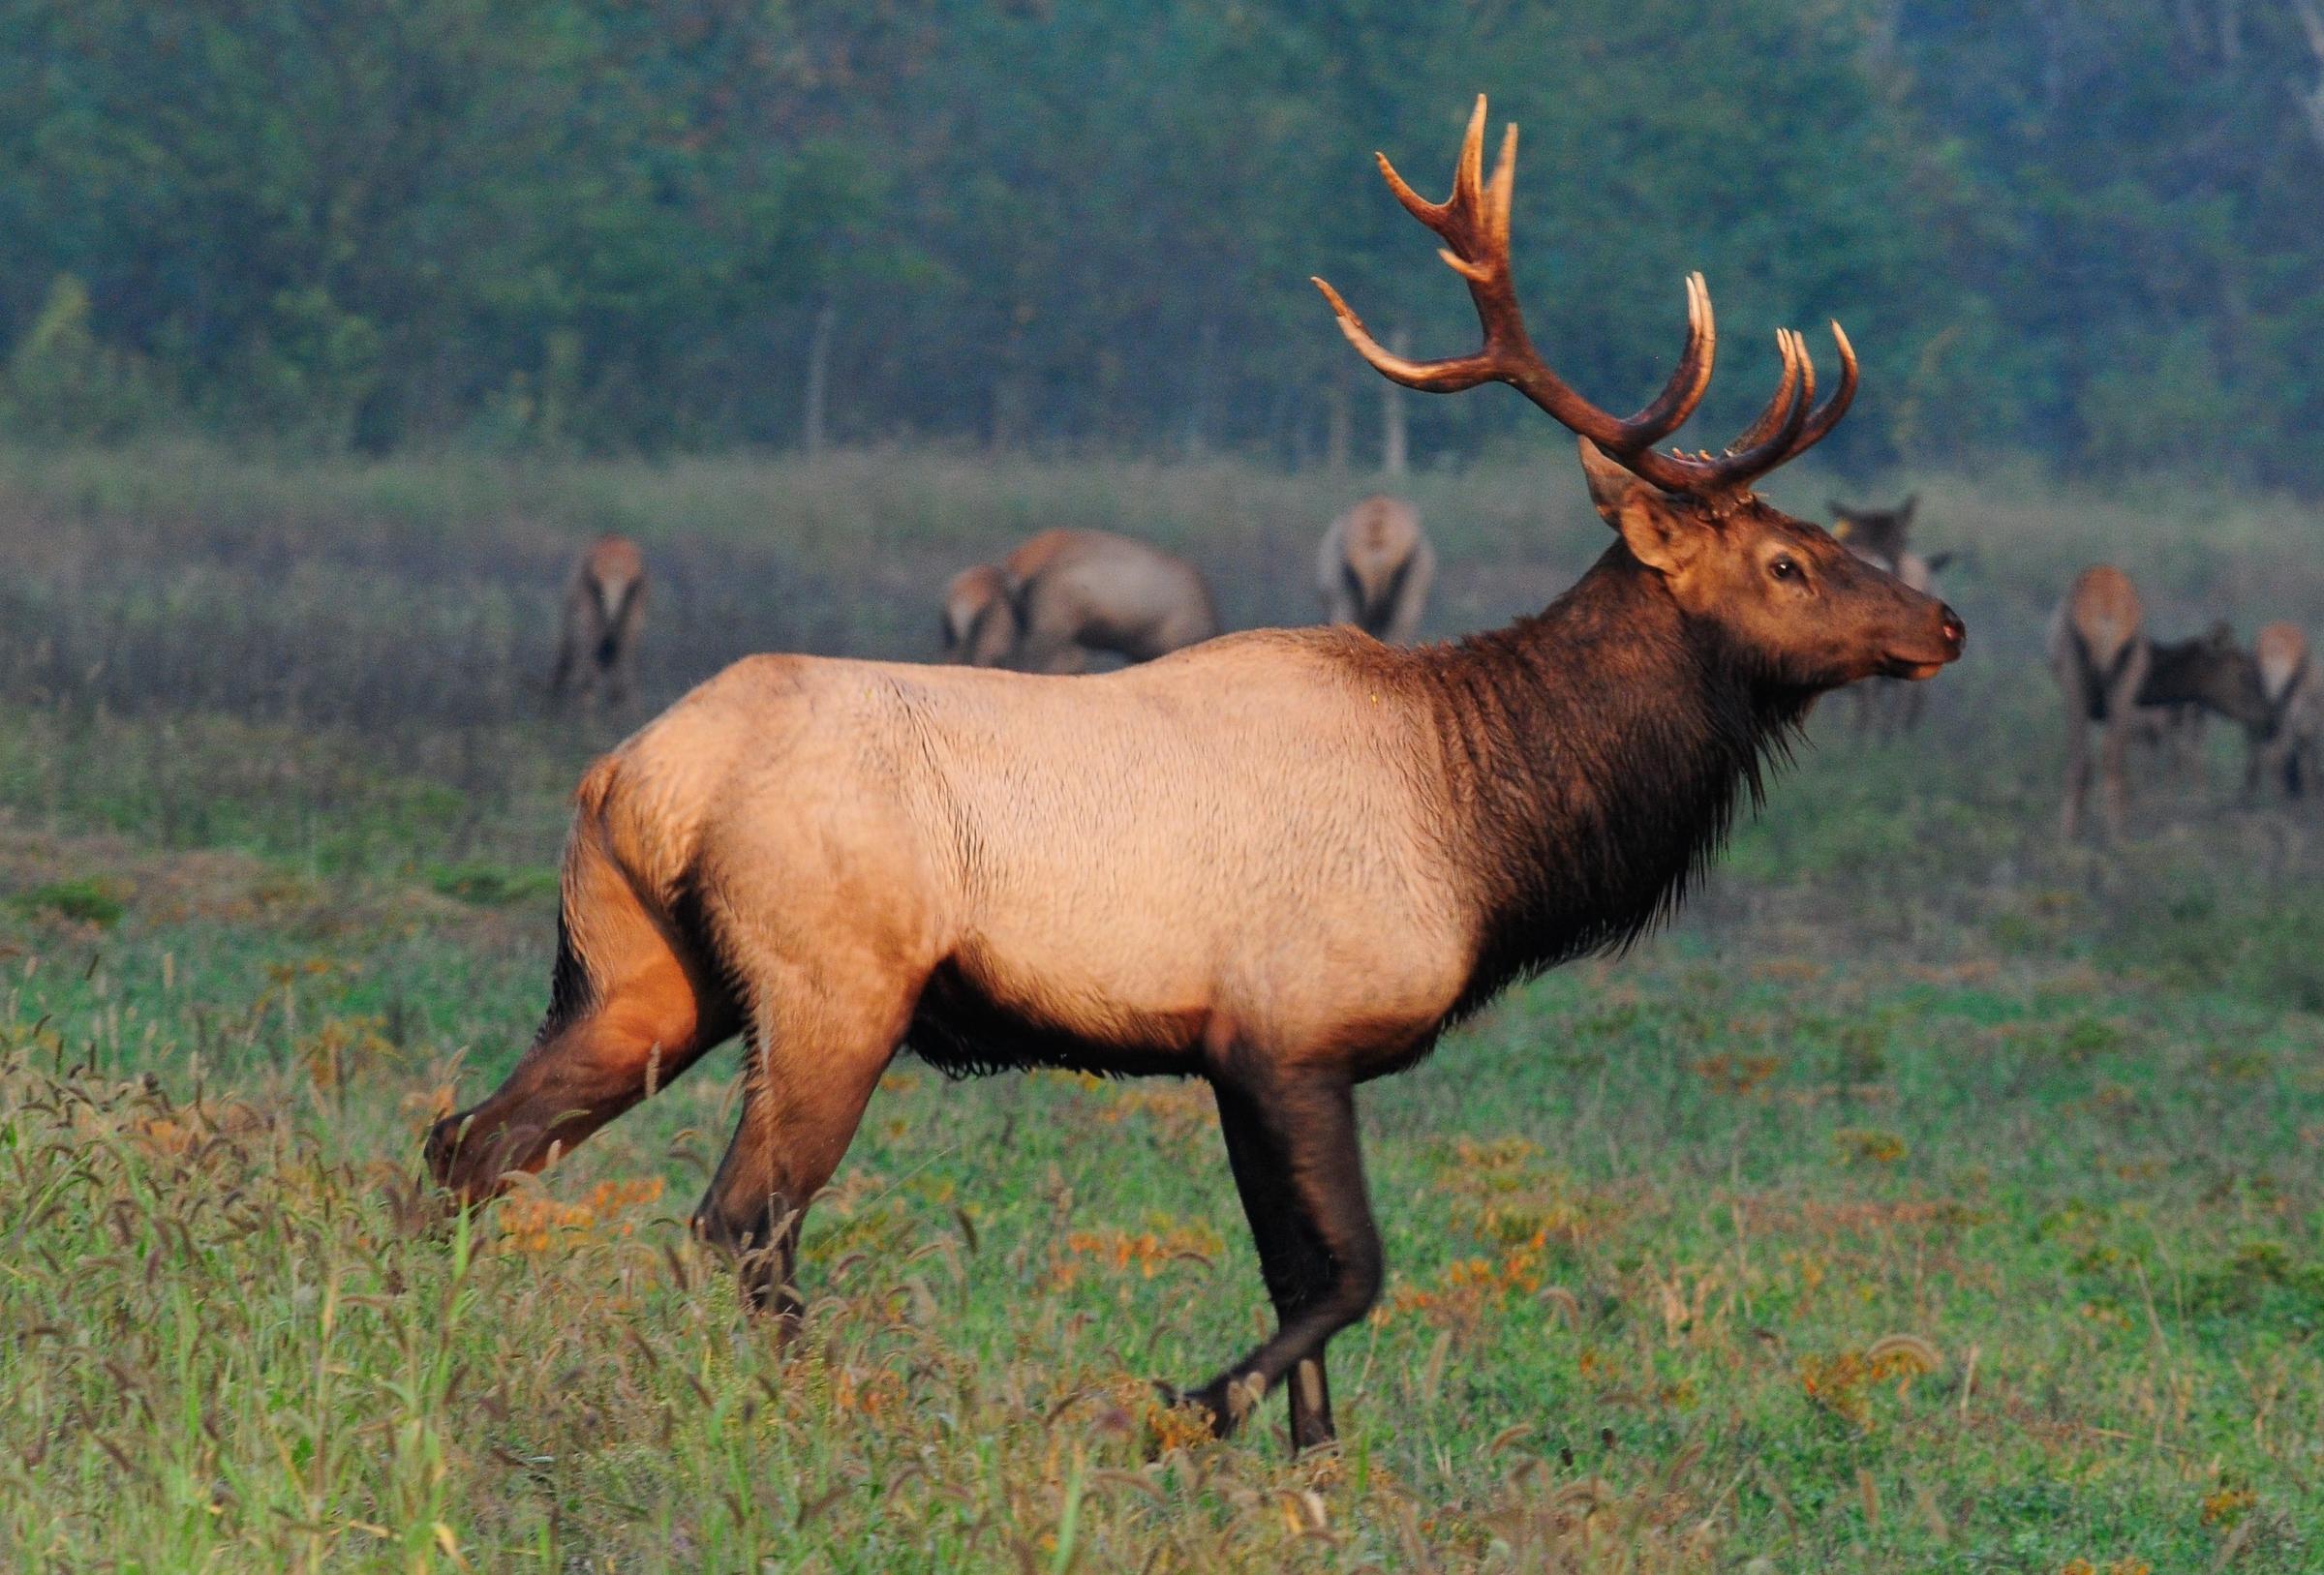 To Hear The Otheworldly Bugle Of An Elk Take A Fall Drive Through Peck Ranch Ksmu Radio